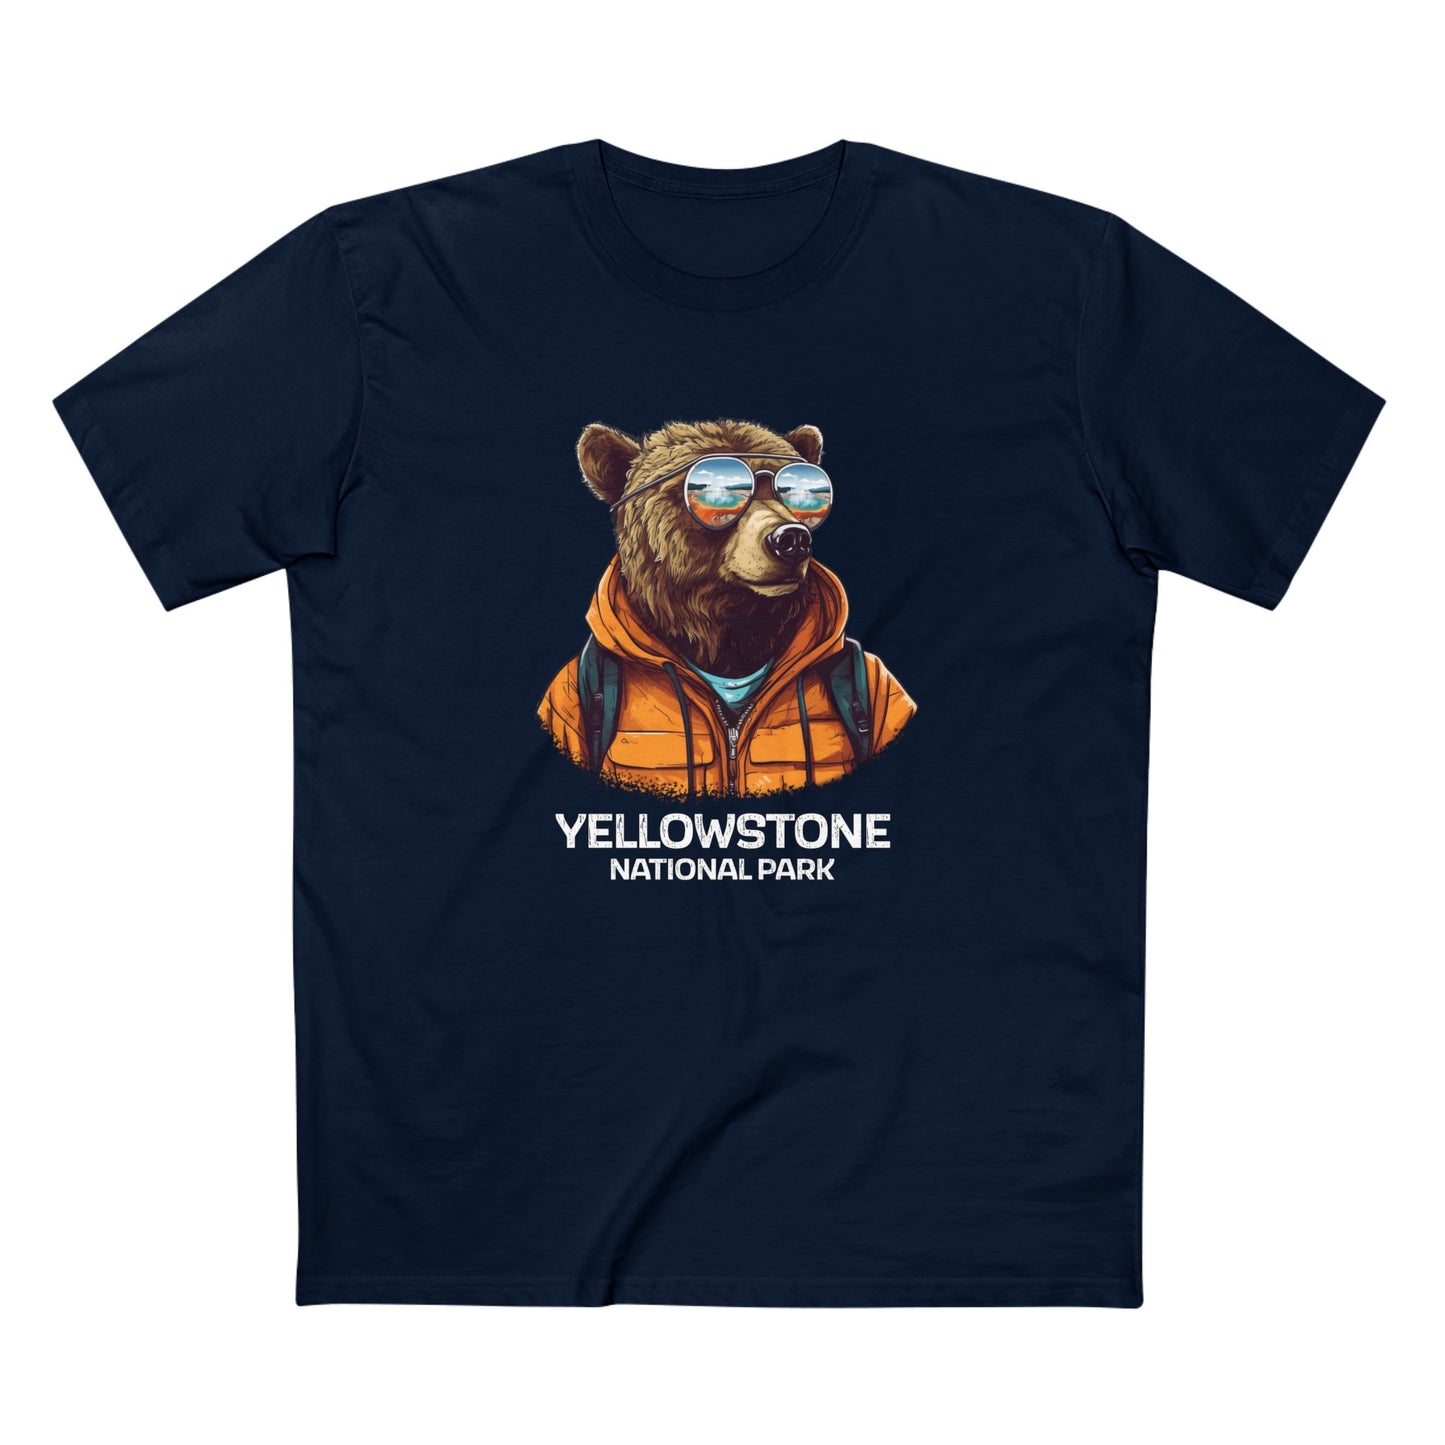 Yellowstone National Park T-Shirt - Grizzly Bear